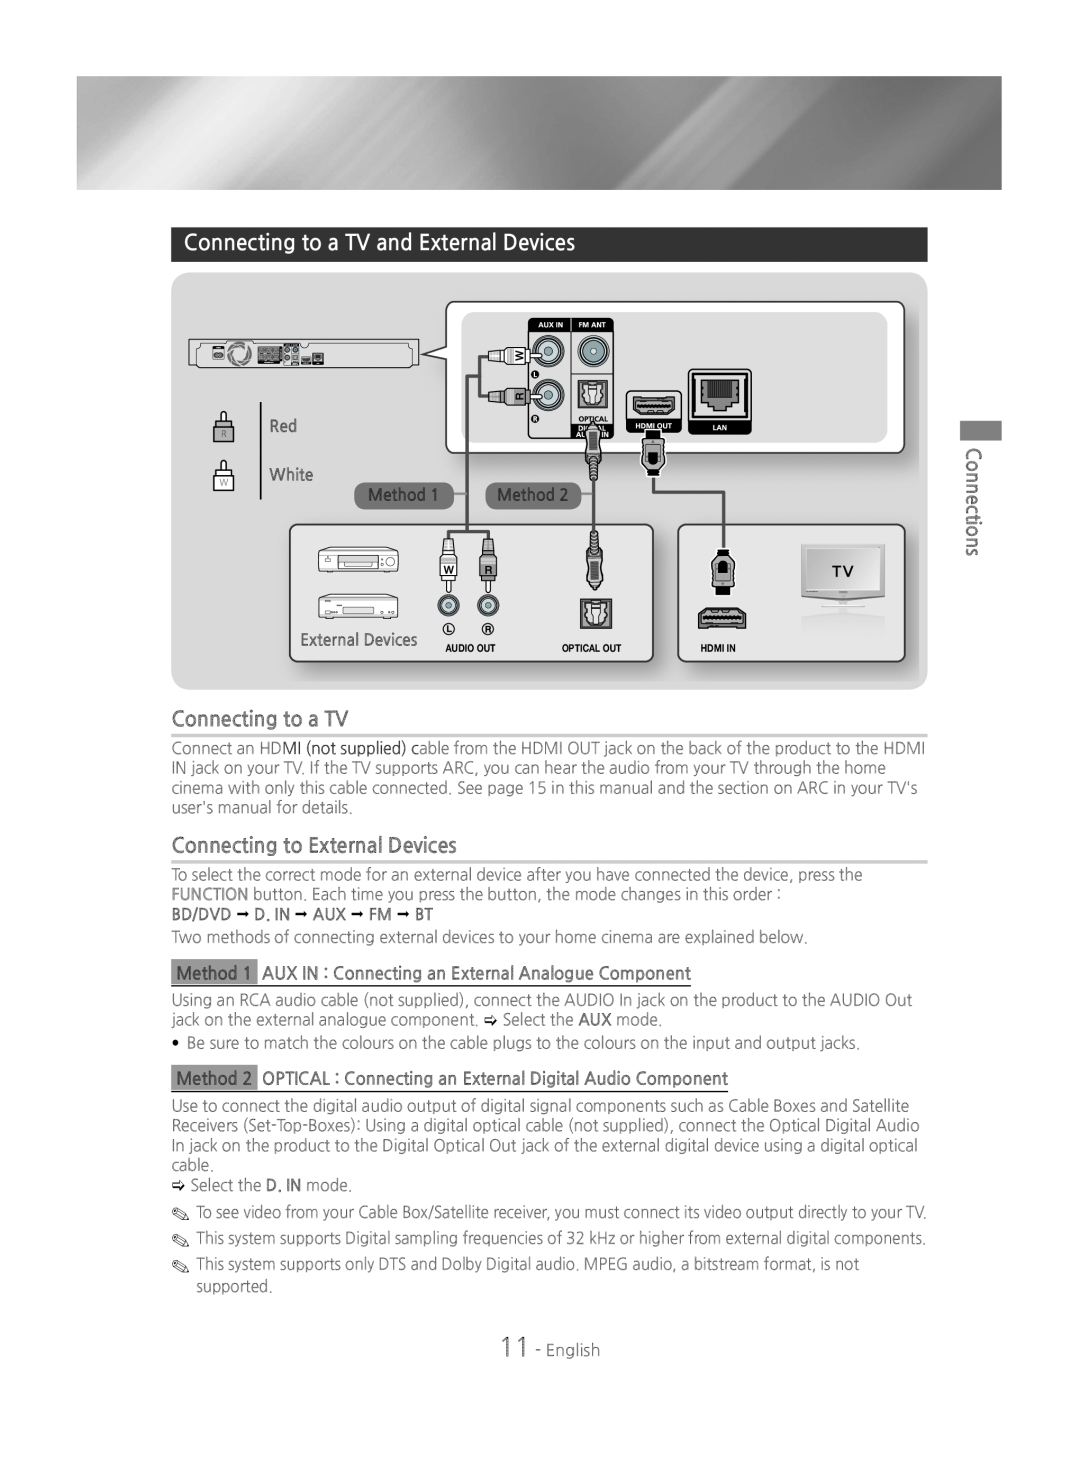 Samsung HT-J4500/EN Connecting to a TV and External Devices, Connecting to External Devices, White, Method, Connections 